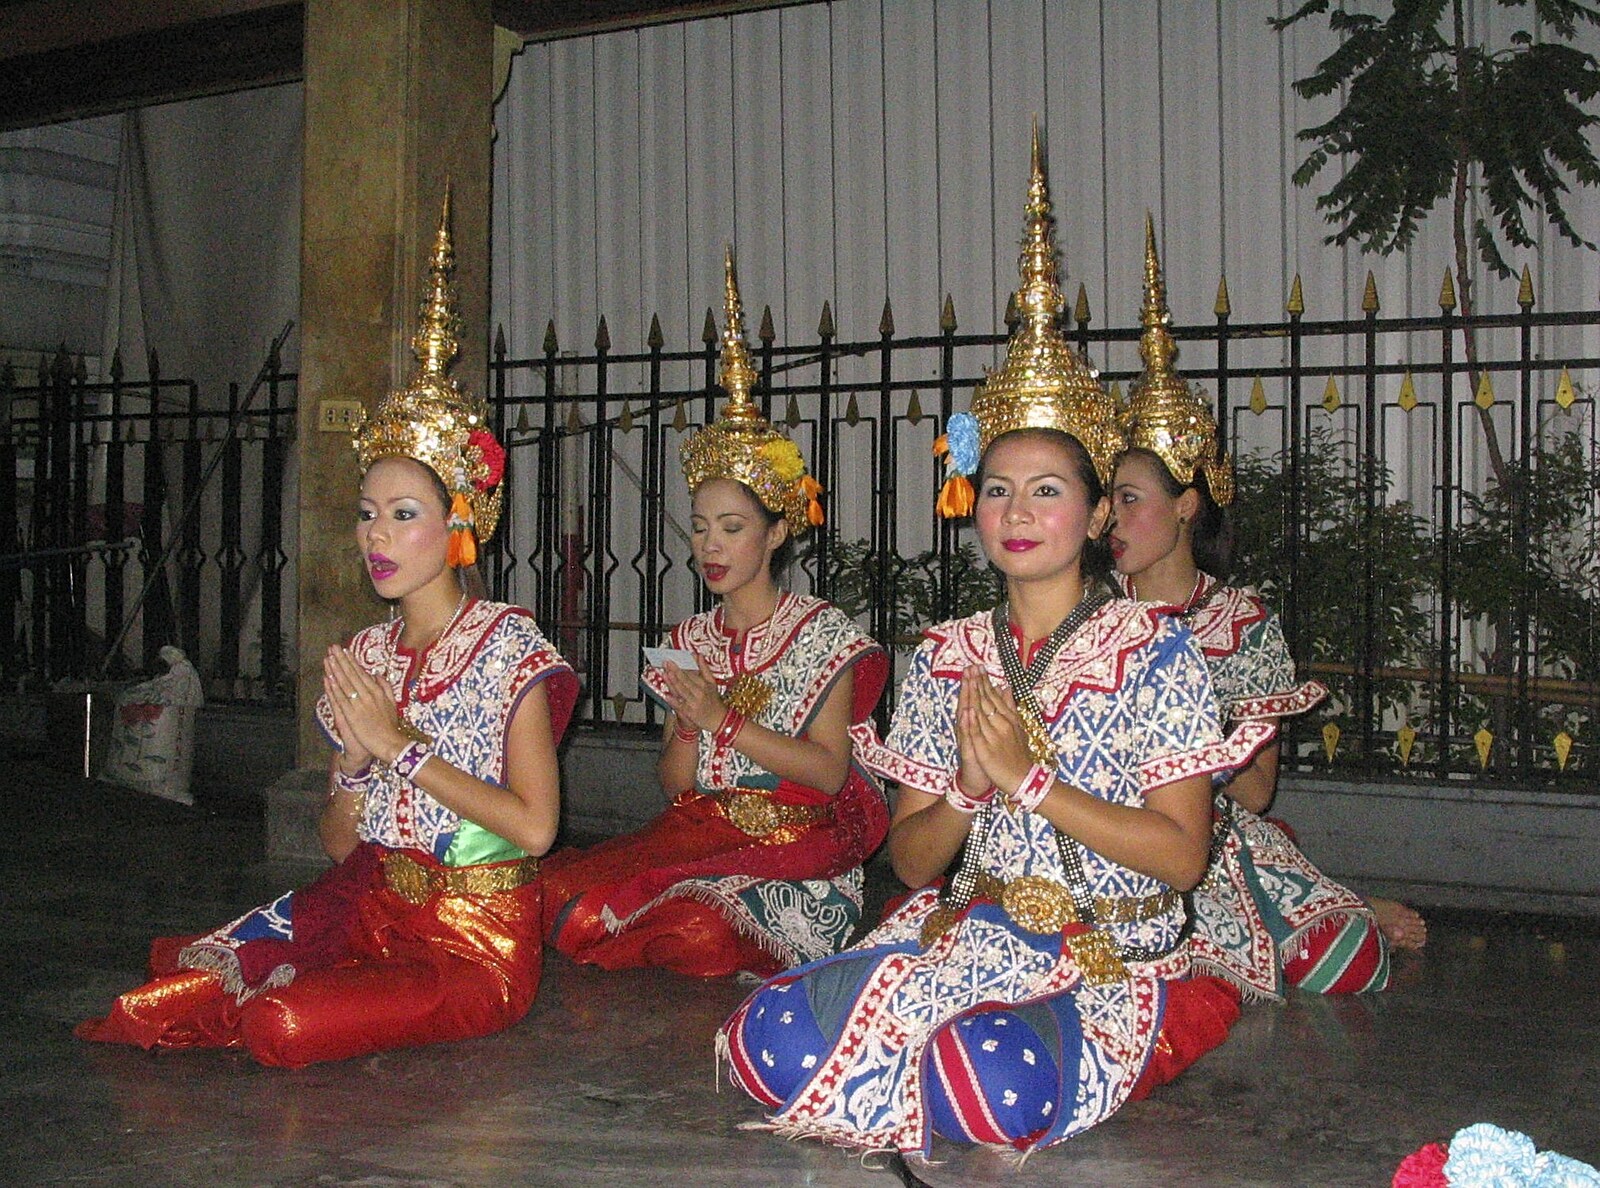 Thai dancers from A Working Trip to Bangkok, Thailand - 2nd October 2004